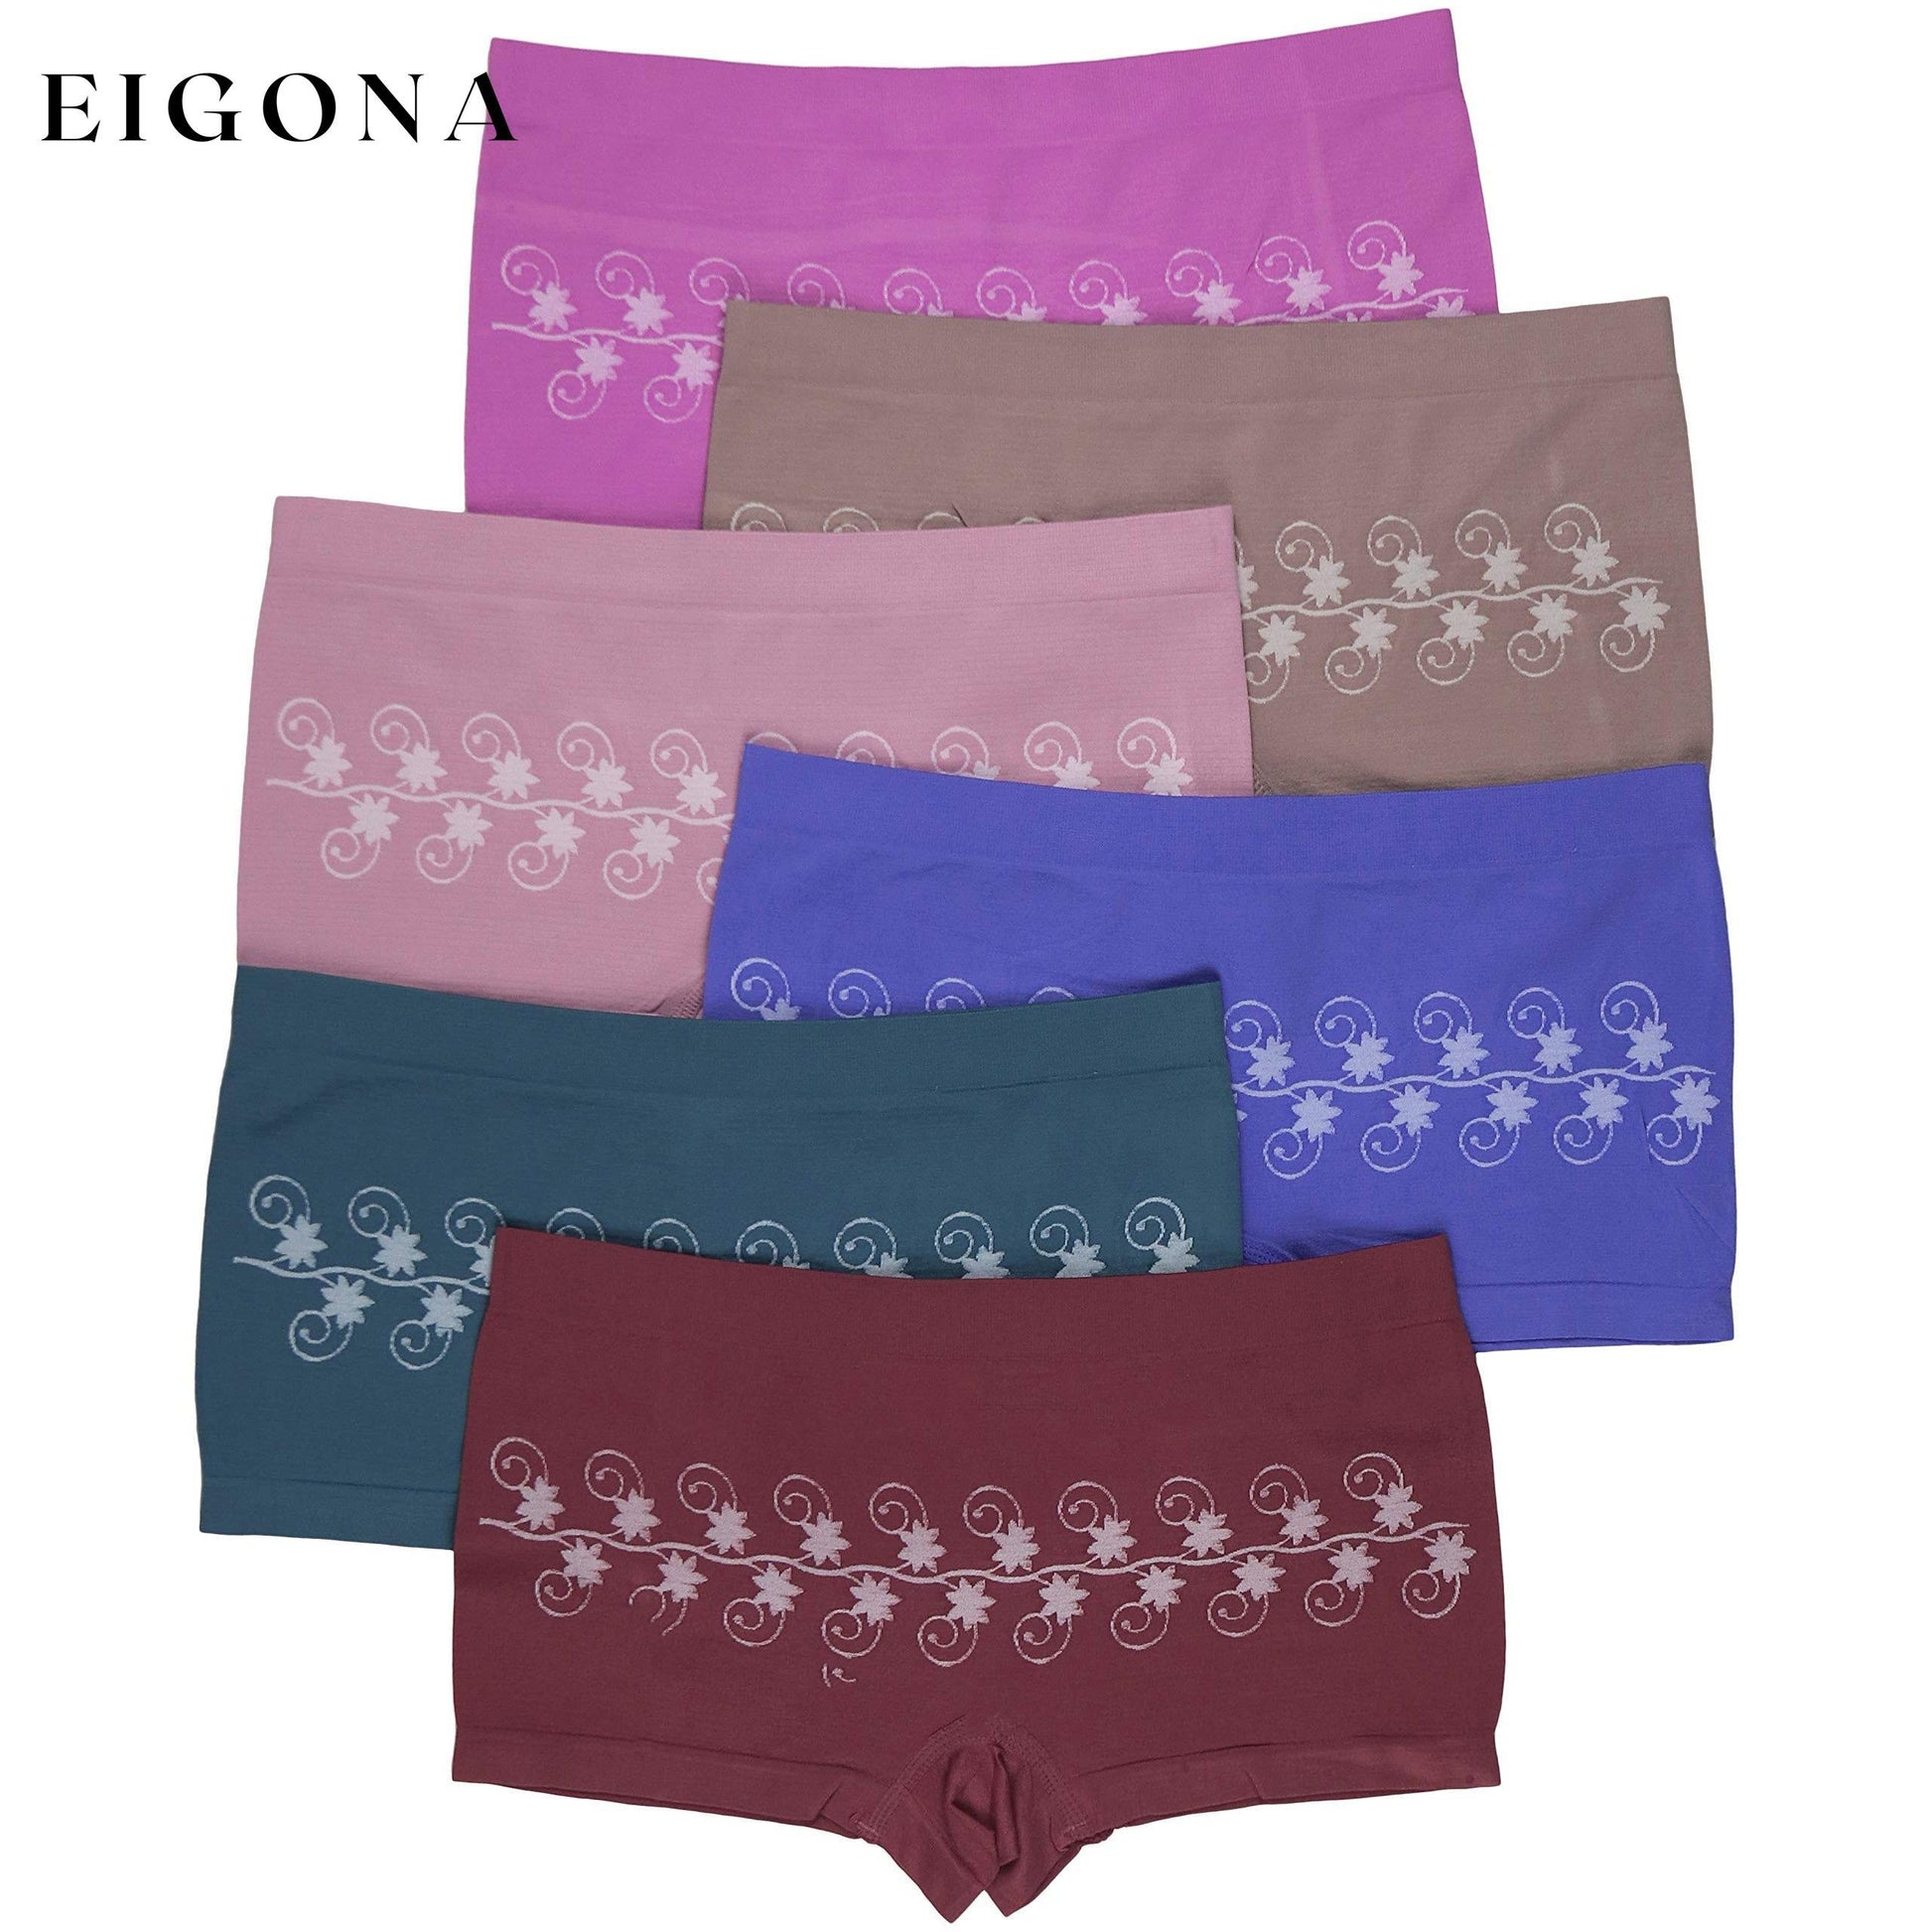 6-Pack: Women's Stretch Microfiber Cheeky Boyshort Panties Curly Floral Pattern __stock:100 lingerie refund_fee:1200